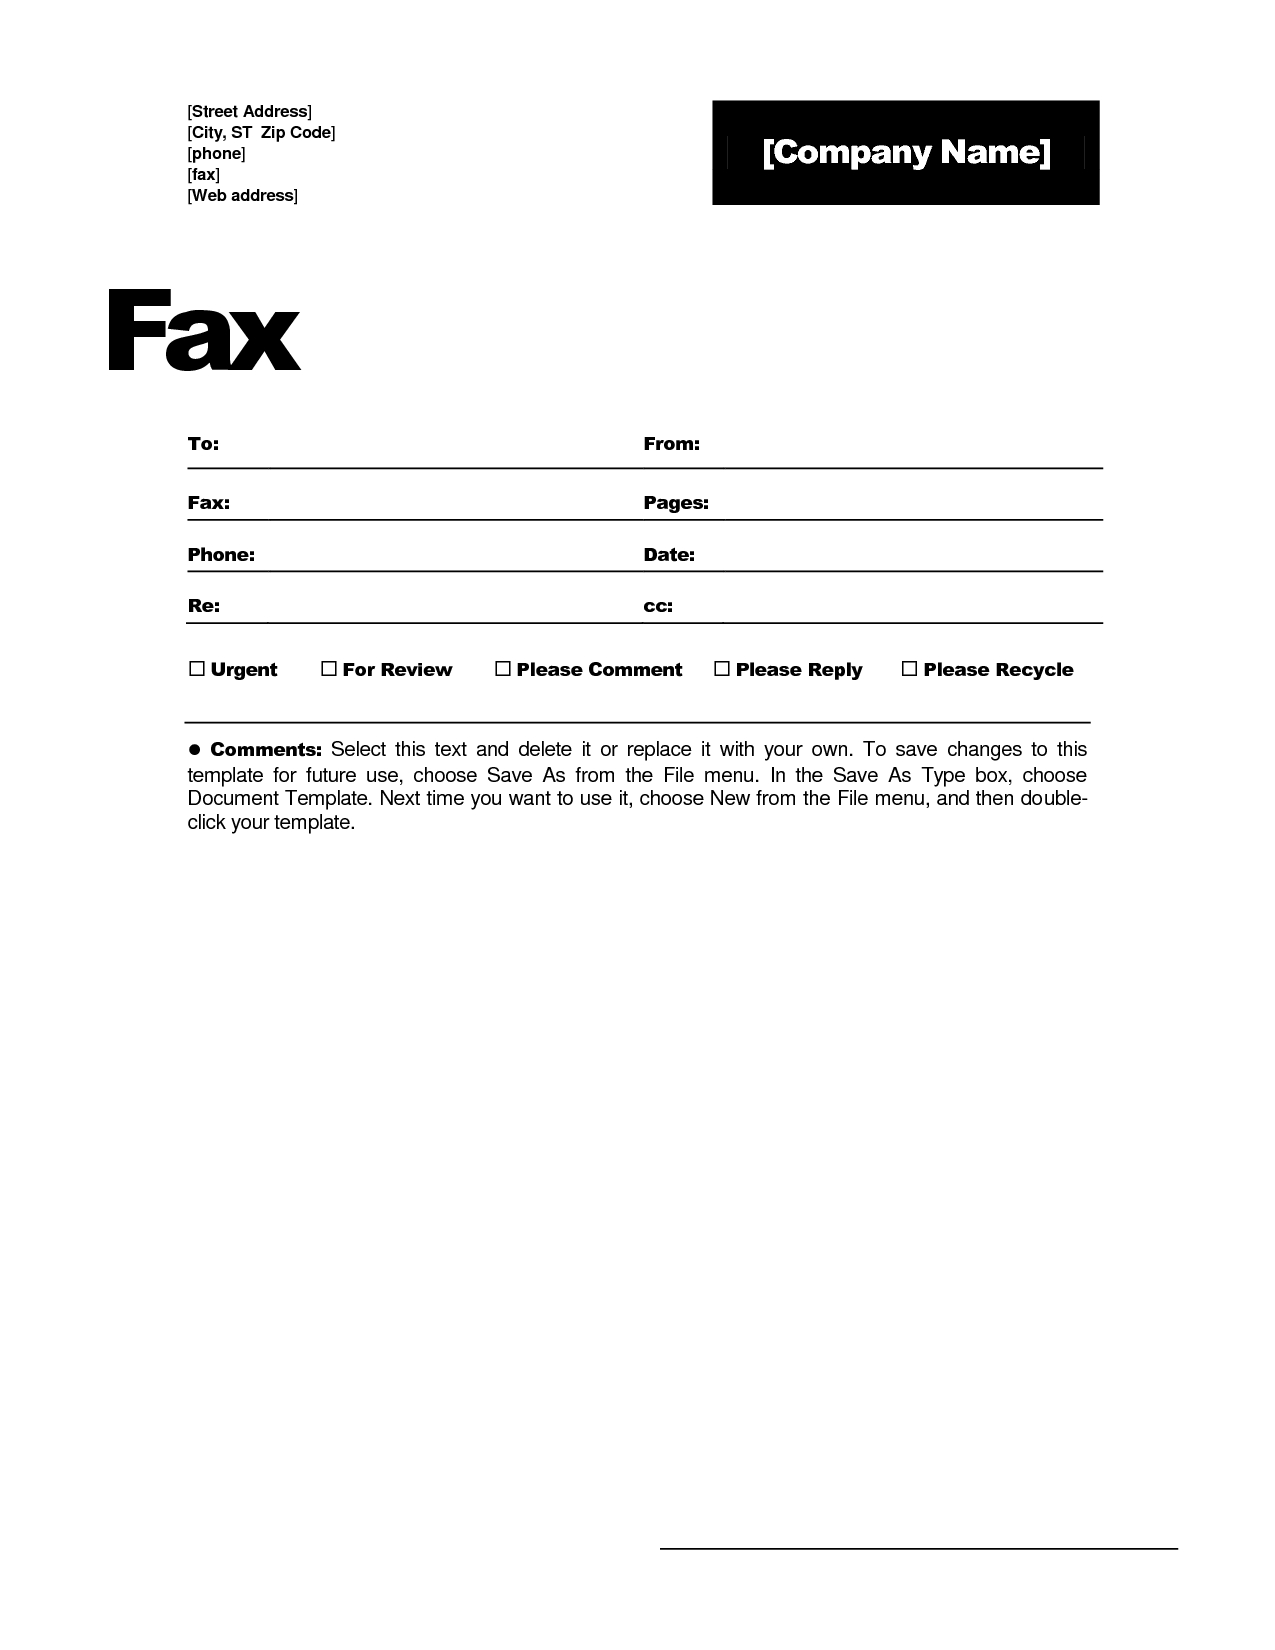 Fax Template In Word 2010 - Calep.midnightpig.co Within Fax Template Word 2010